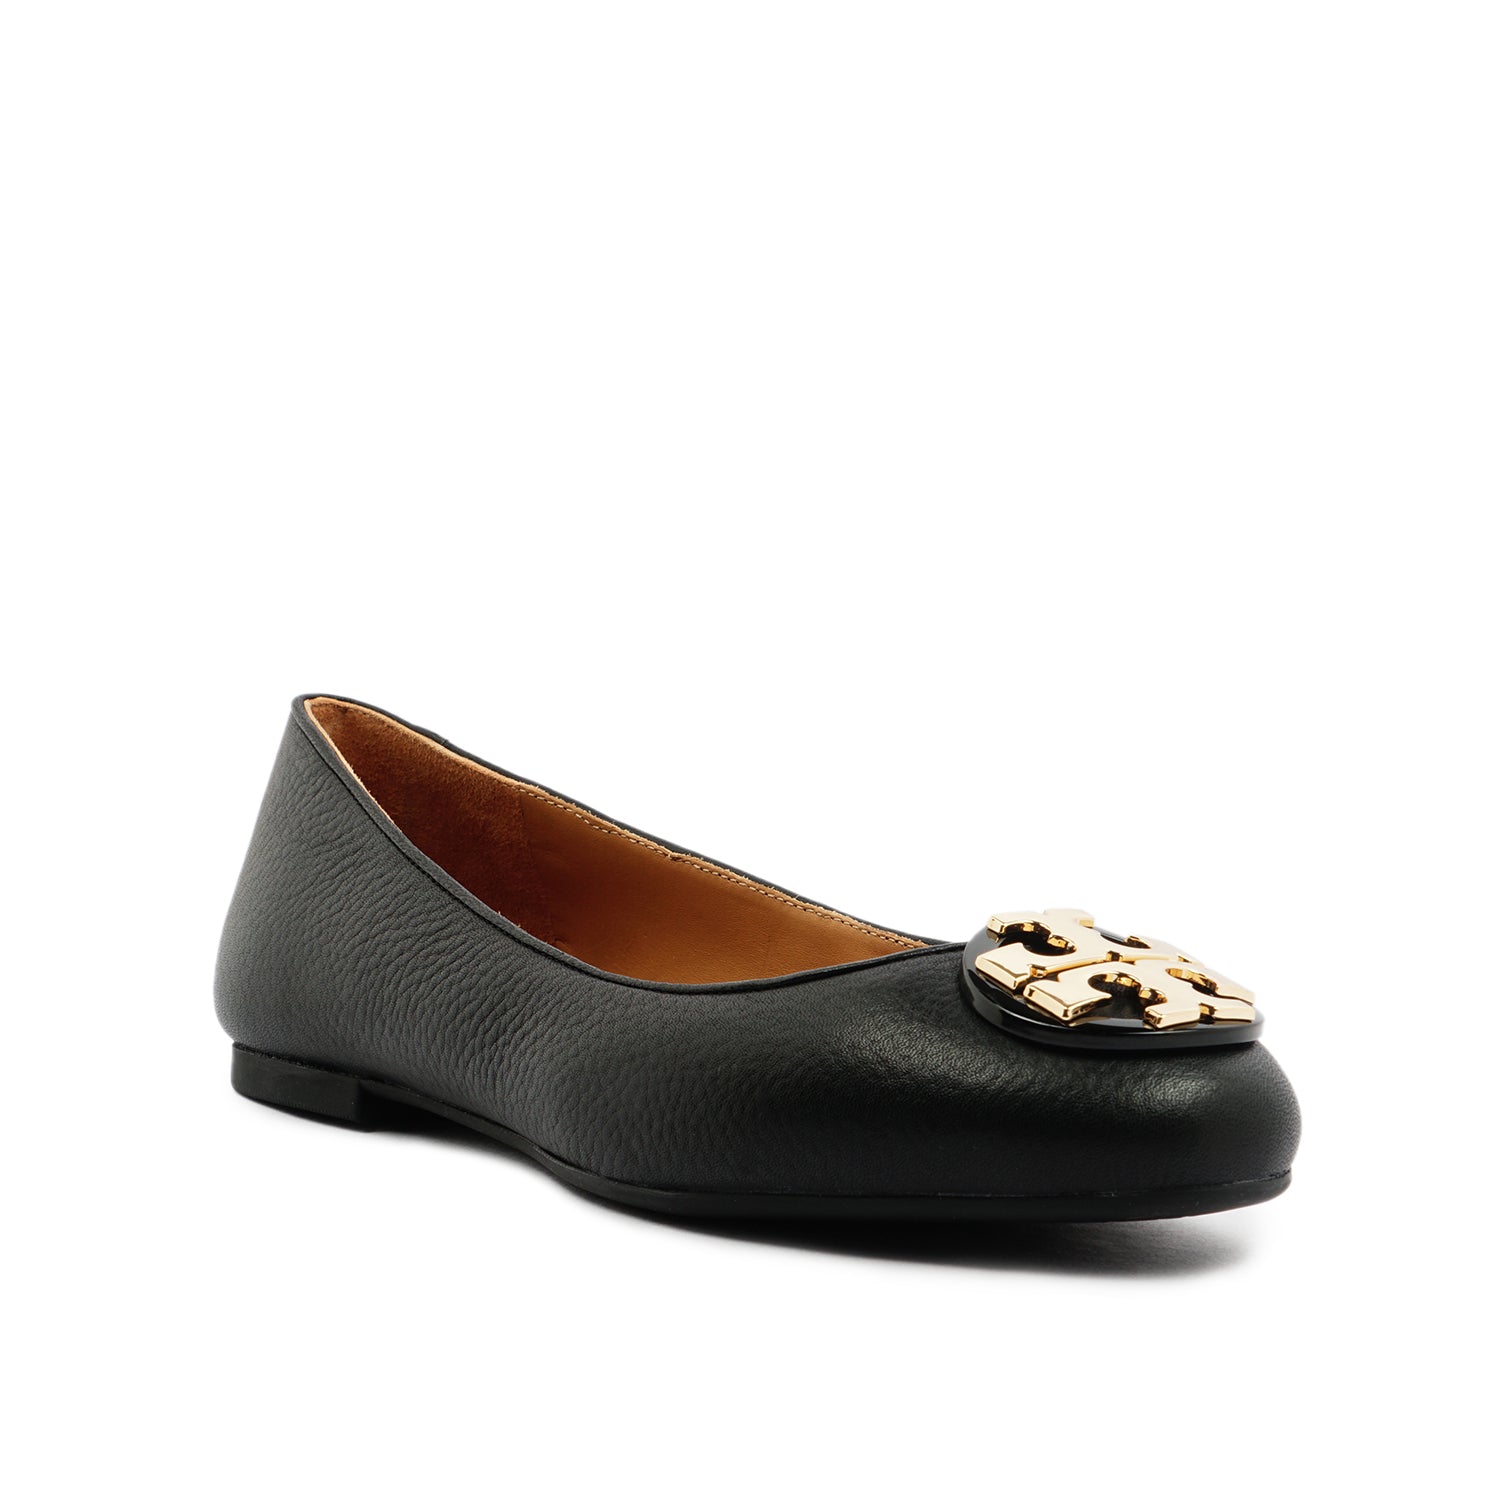 TORY BURCH CLAIRE BALLET FLAT IN BLACK